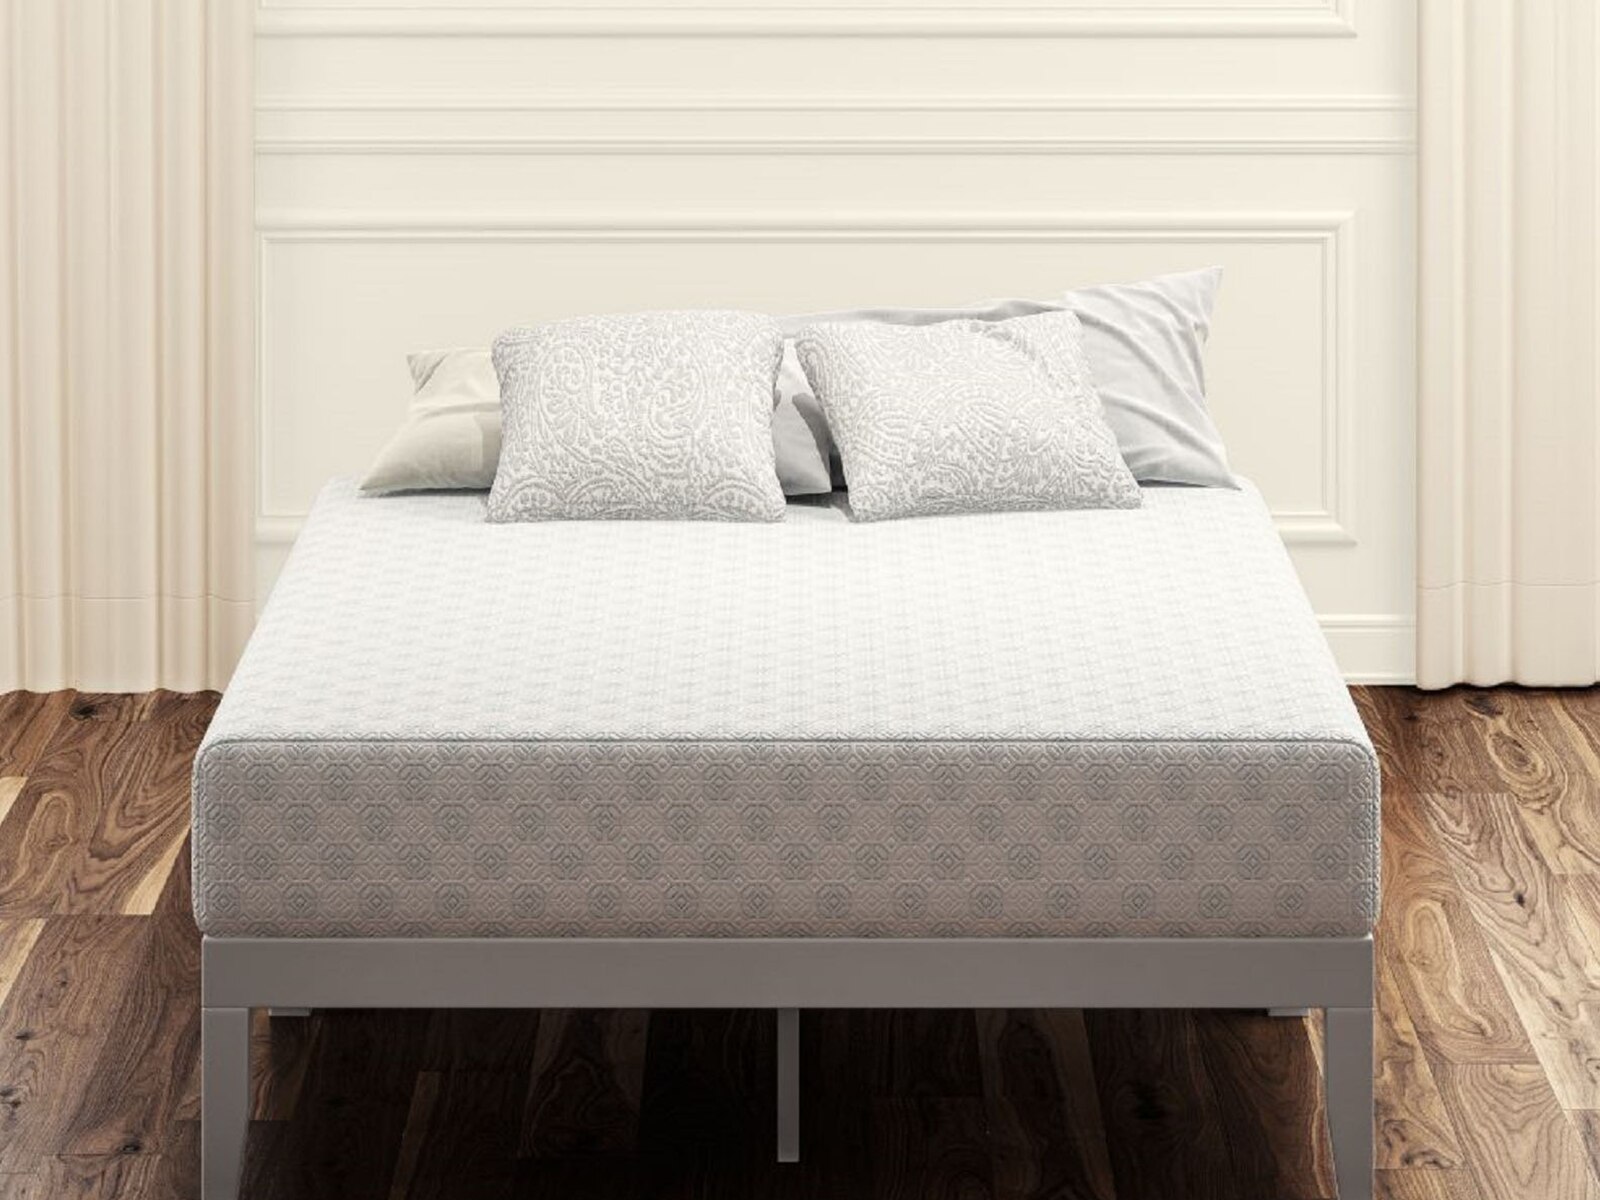 all night therapy elite mygel 12 inch mattress